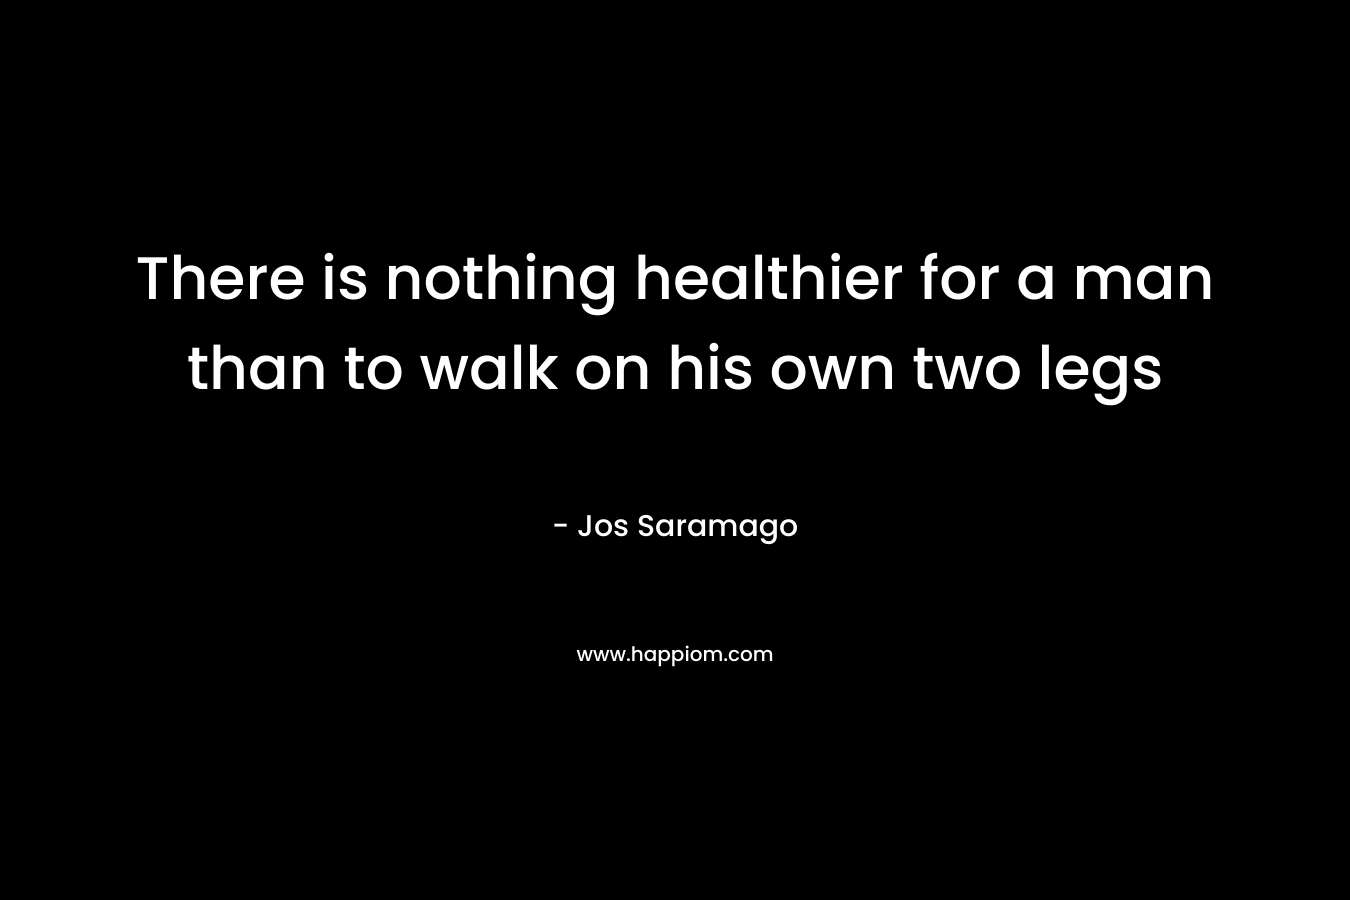 There is nothing healthier for a man than to walk on his own two legs – Jos Saramago